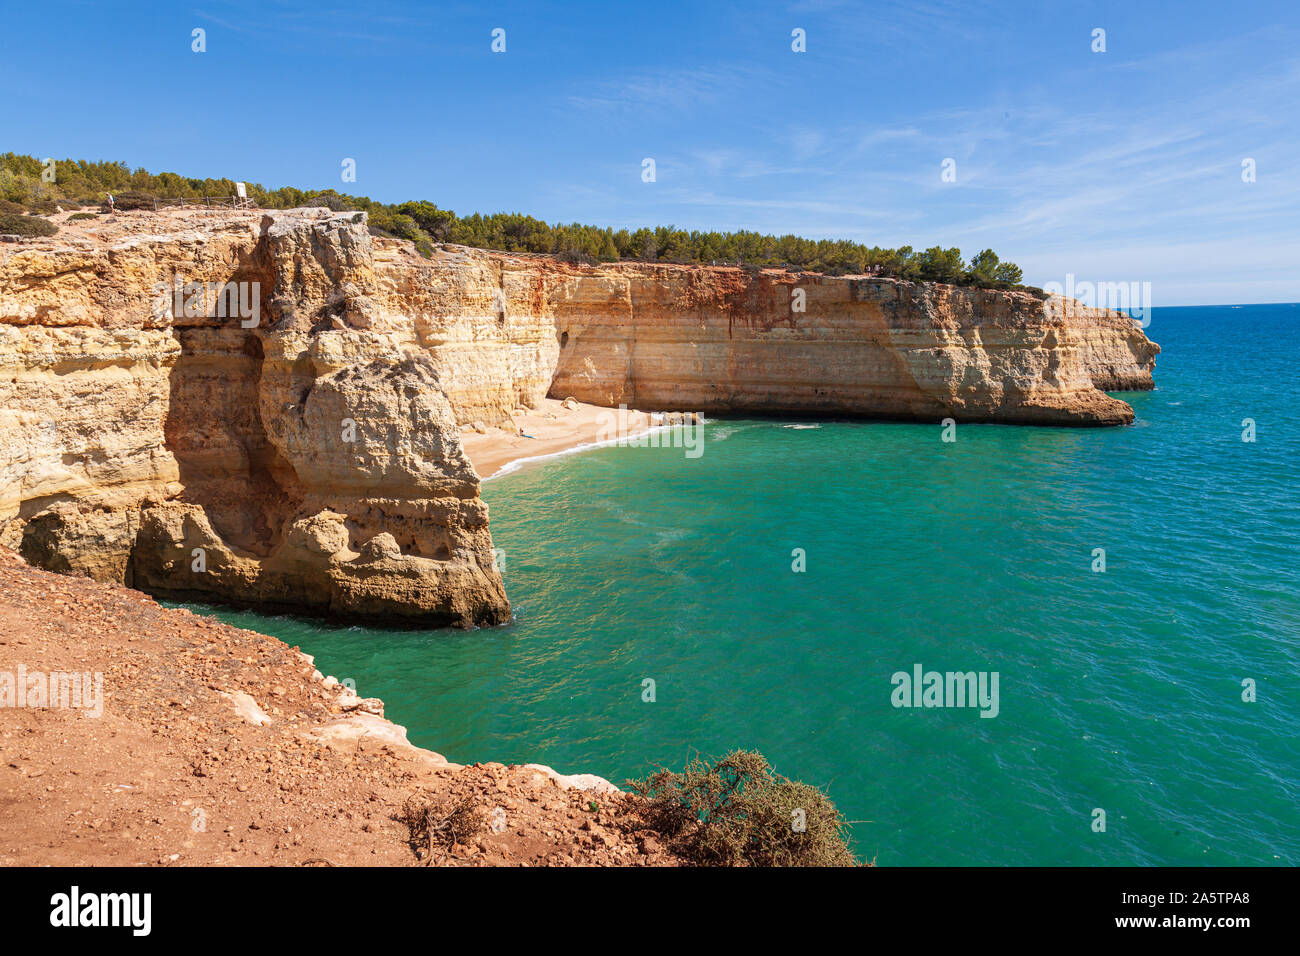 view of the algarve coastline late summer rocky outcrops sea caves and cliffs Stock Photo